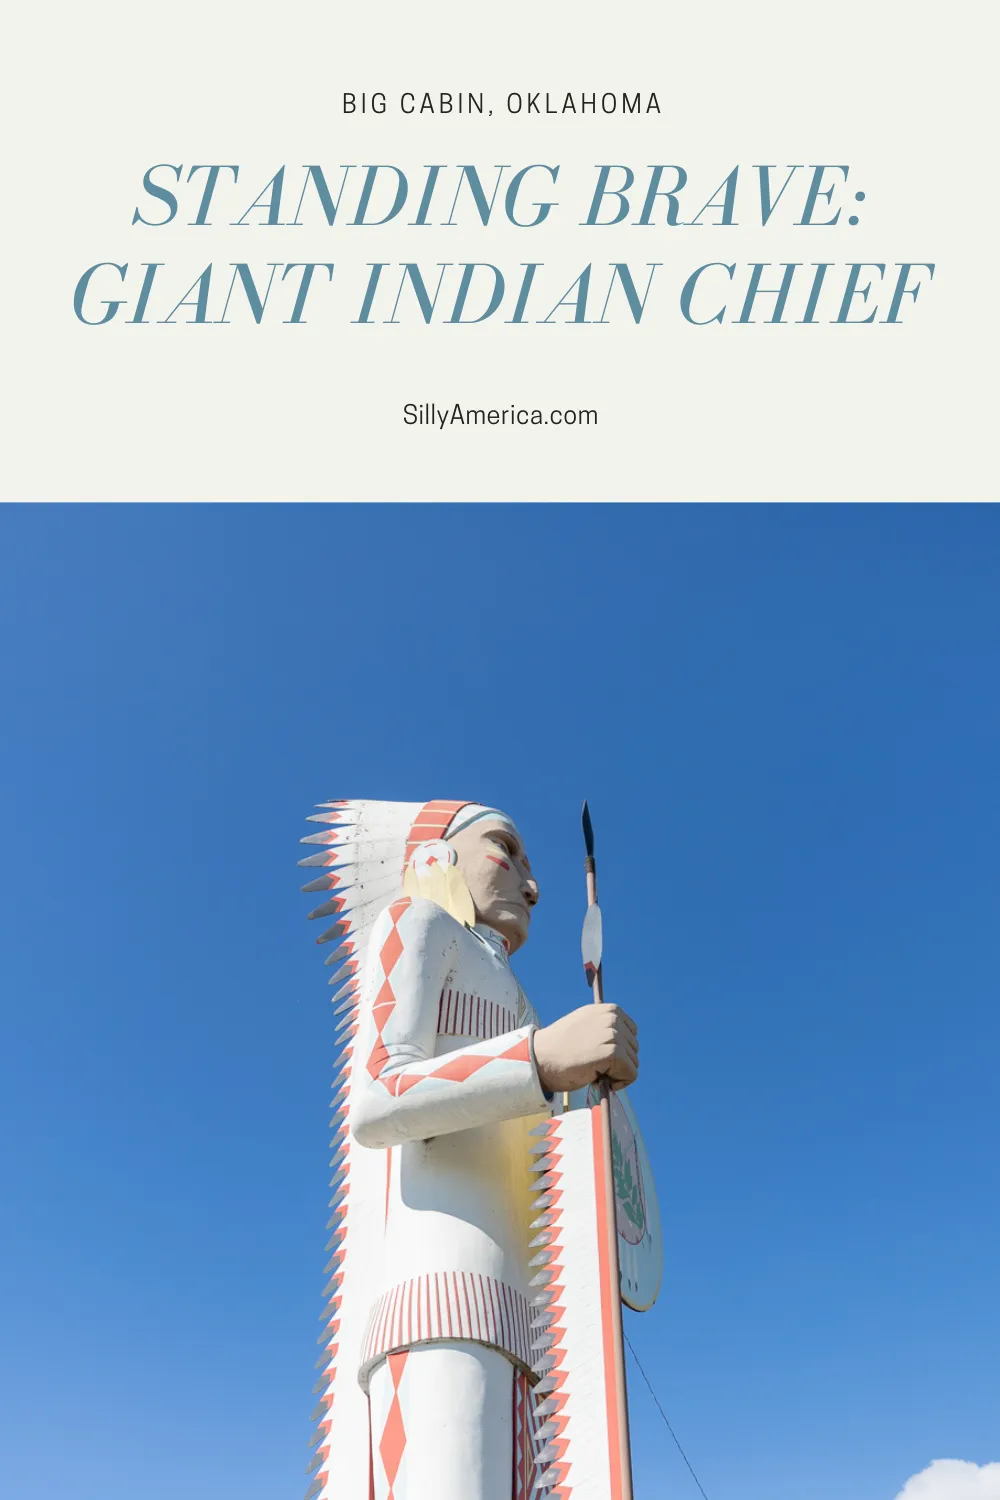 Find this roadside attraction on your Route 66 road trip: the Chief Standing Brave statue is a giant Indian chief statue in Big Cabin, Oklahoma.  #RoadTrips #RoadTripStop #Route66 #Route66RoadTrip #OklahomaRoute66 #Oklahoma #OklahomaRoadTrip #OklahomaRoadsideAttractions #RoadsideAttractions #RoadsideAttraction #RoadsideAmerica #RoadTrip